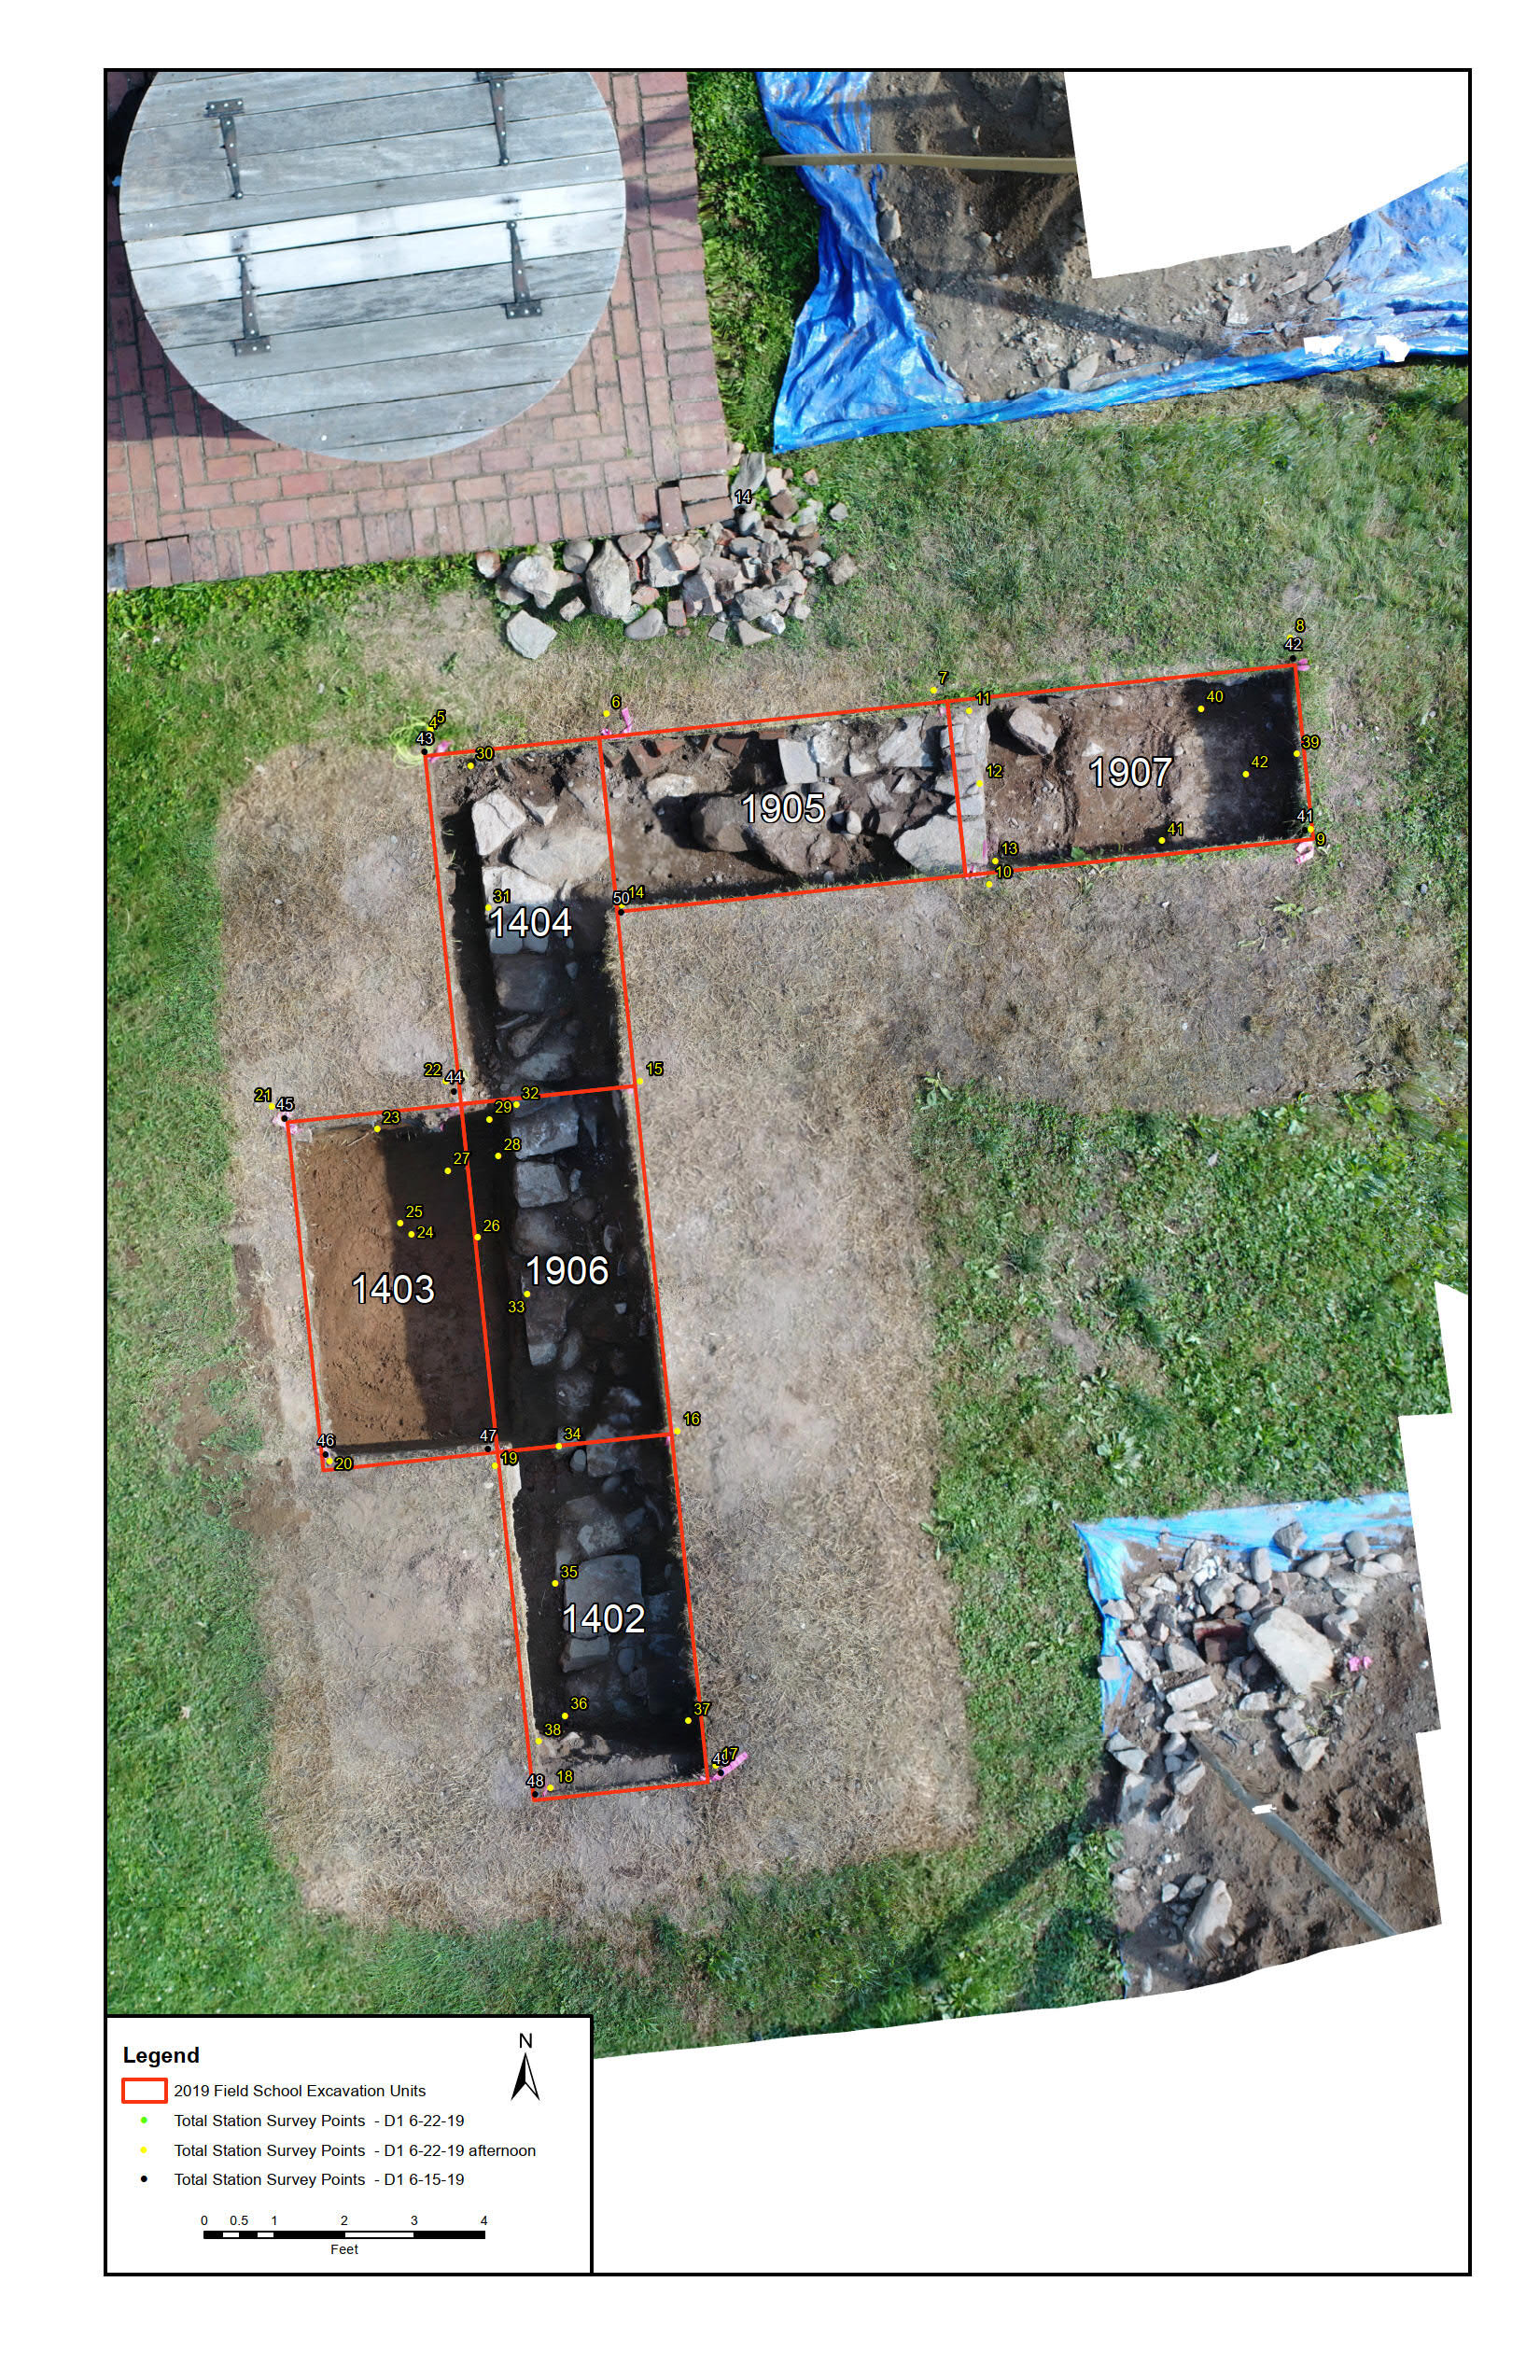 19018 In Progress Site Plan of Kitchen Wing with 2019 Excavation Unit Locations and Survey Points - Aerial 10.10.19_1.jpg